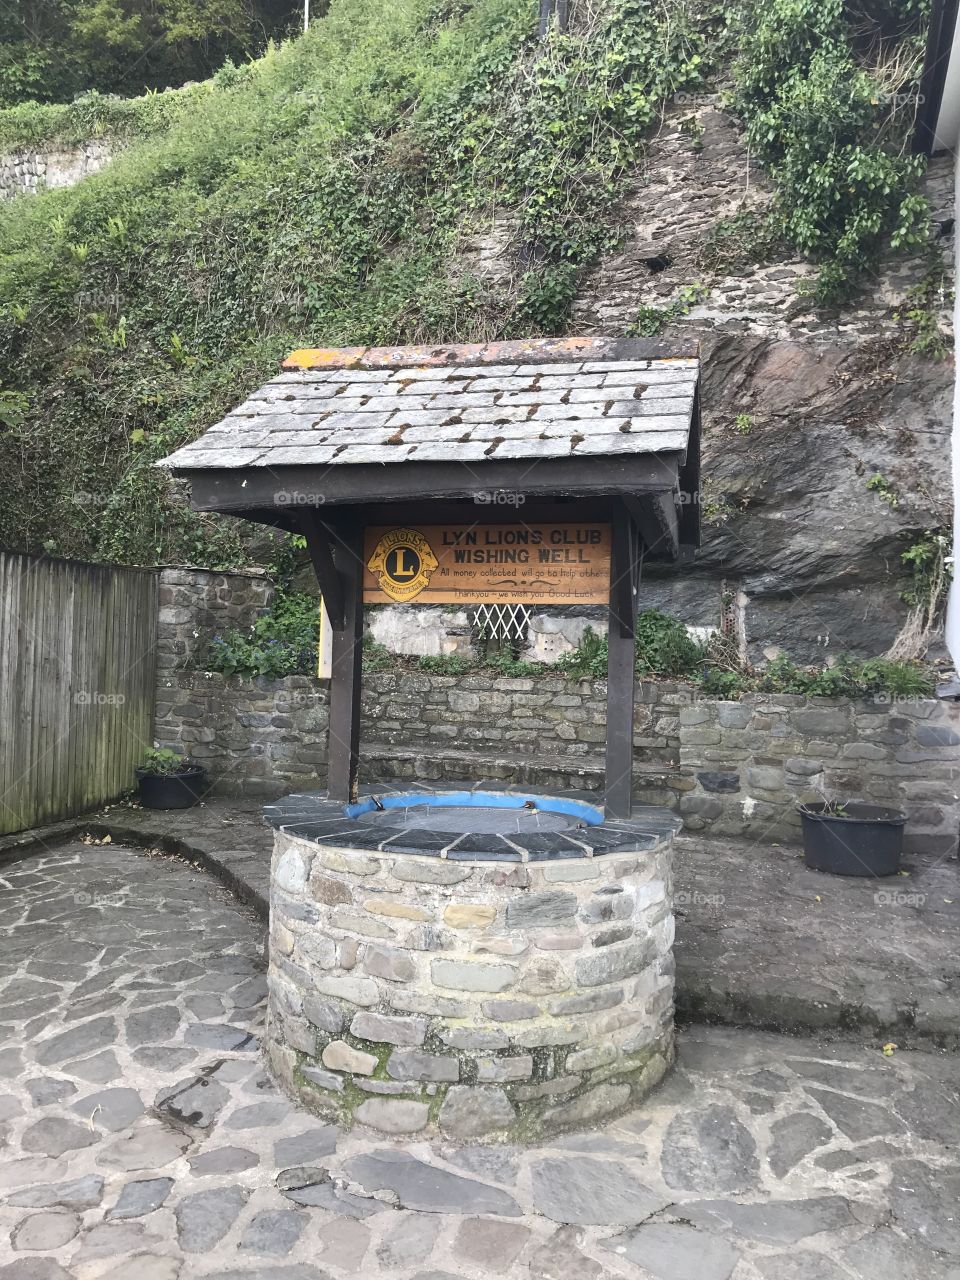 A wishing well that combines usage with a meaningful build, l think it’s lovely and that authentic stone finishes the job perfectly.